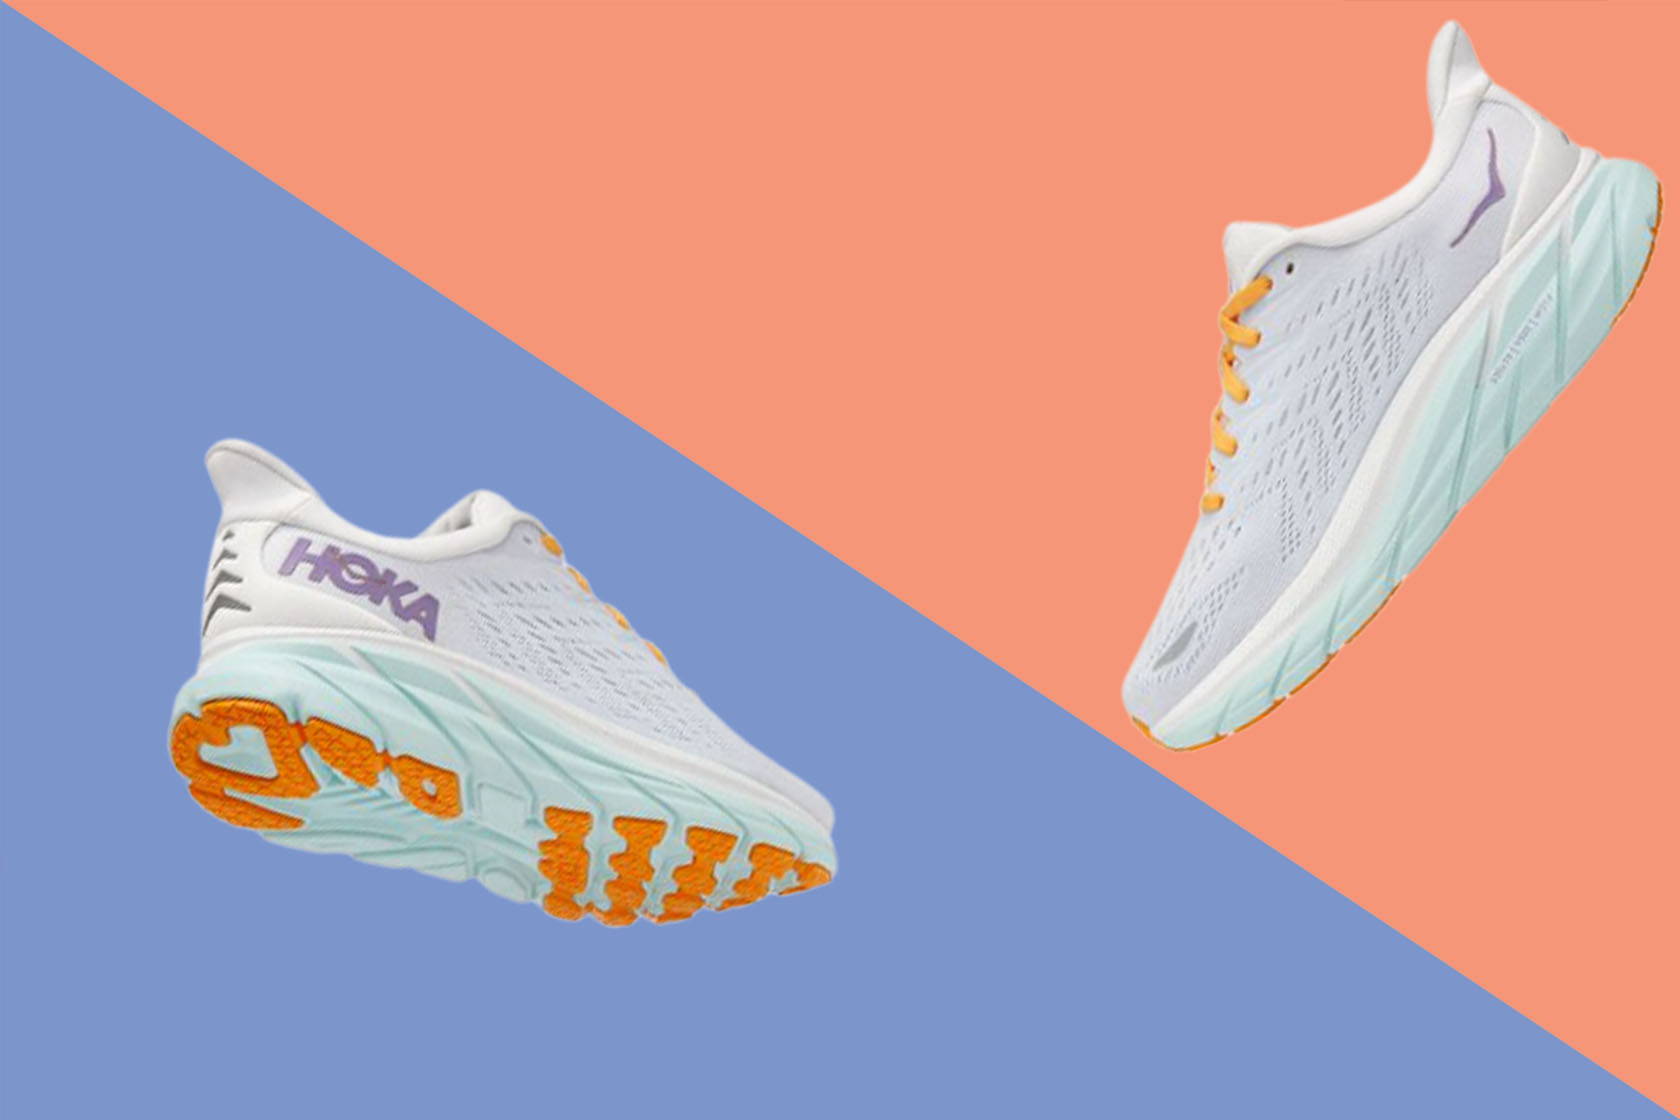 TikTok trend: Get the Hoka Clifton 8 sneakers for 30% before they sell out